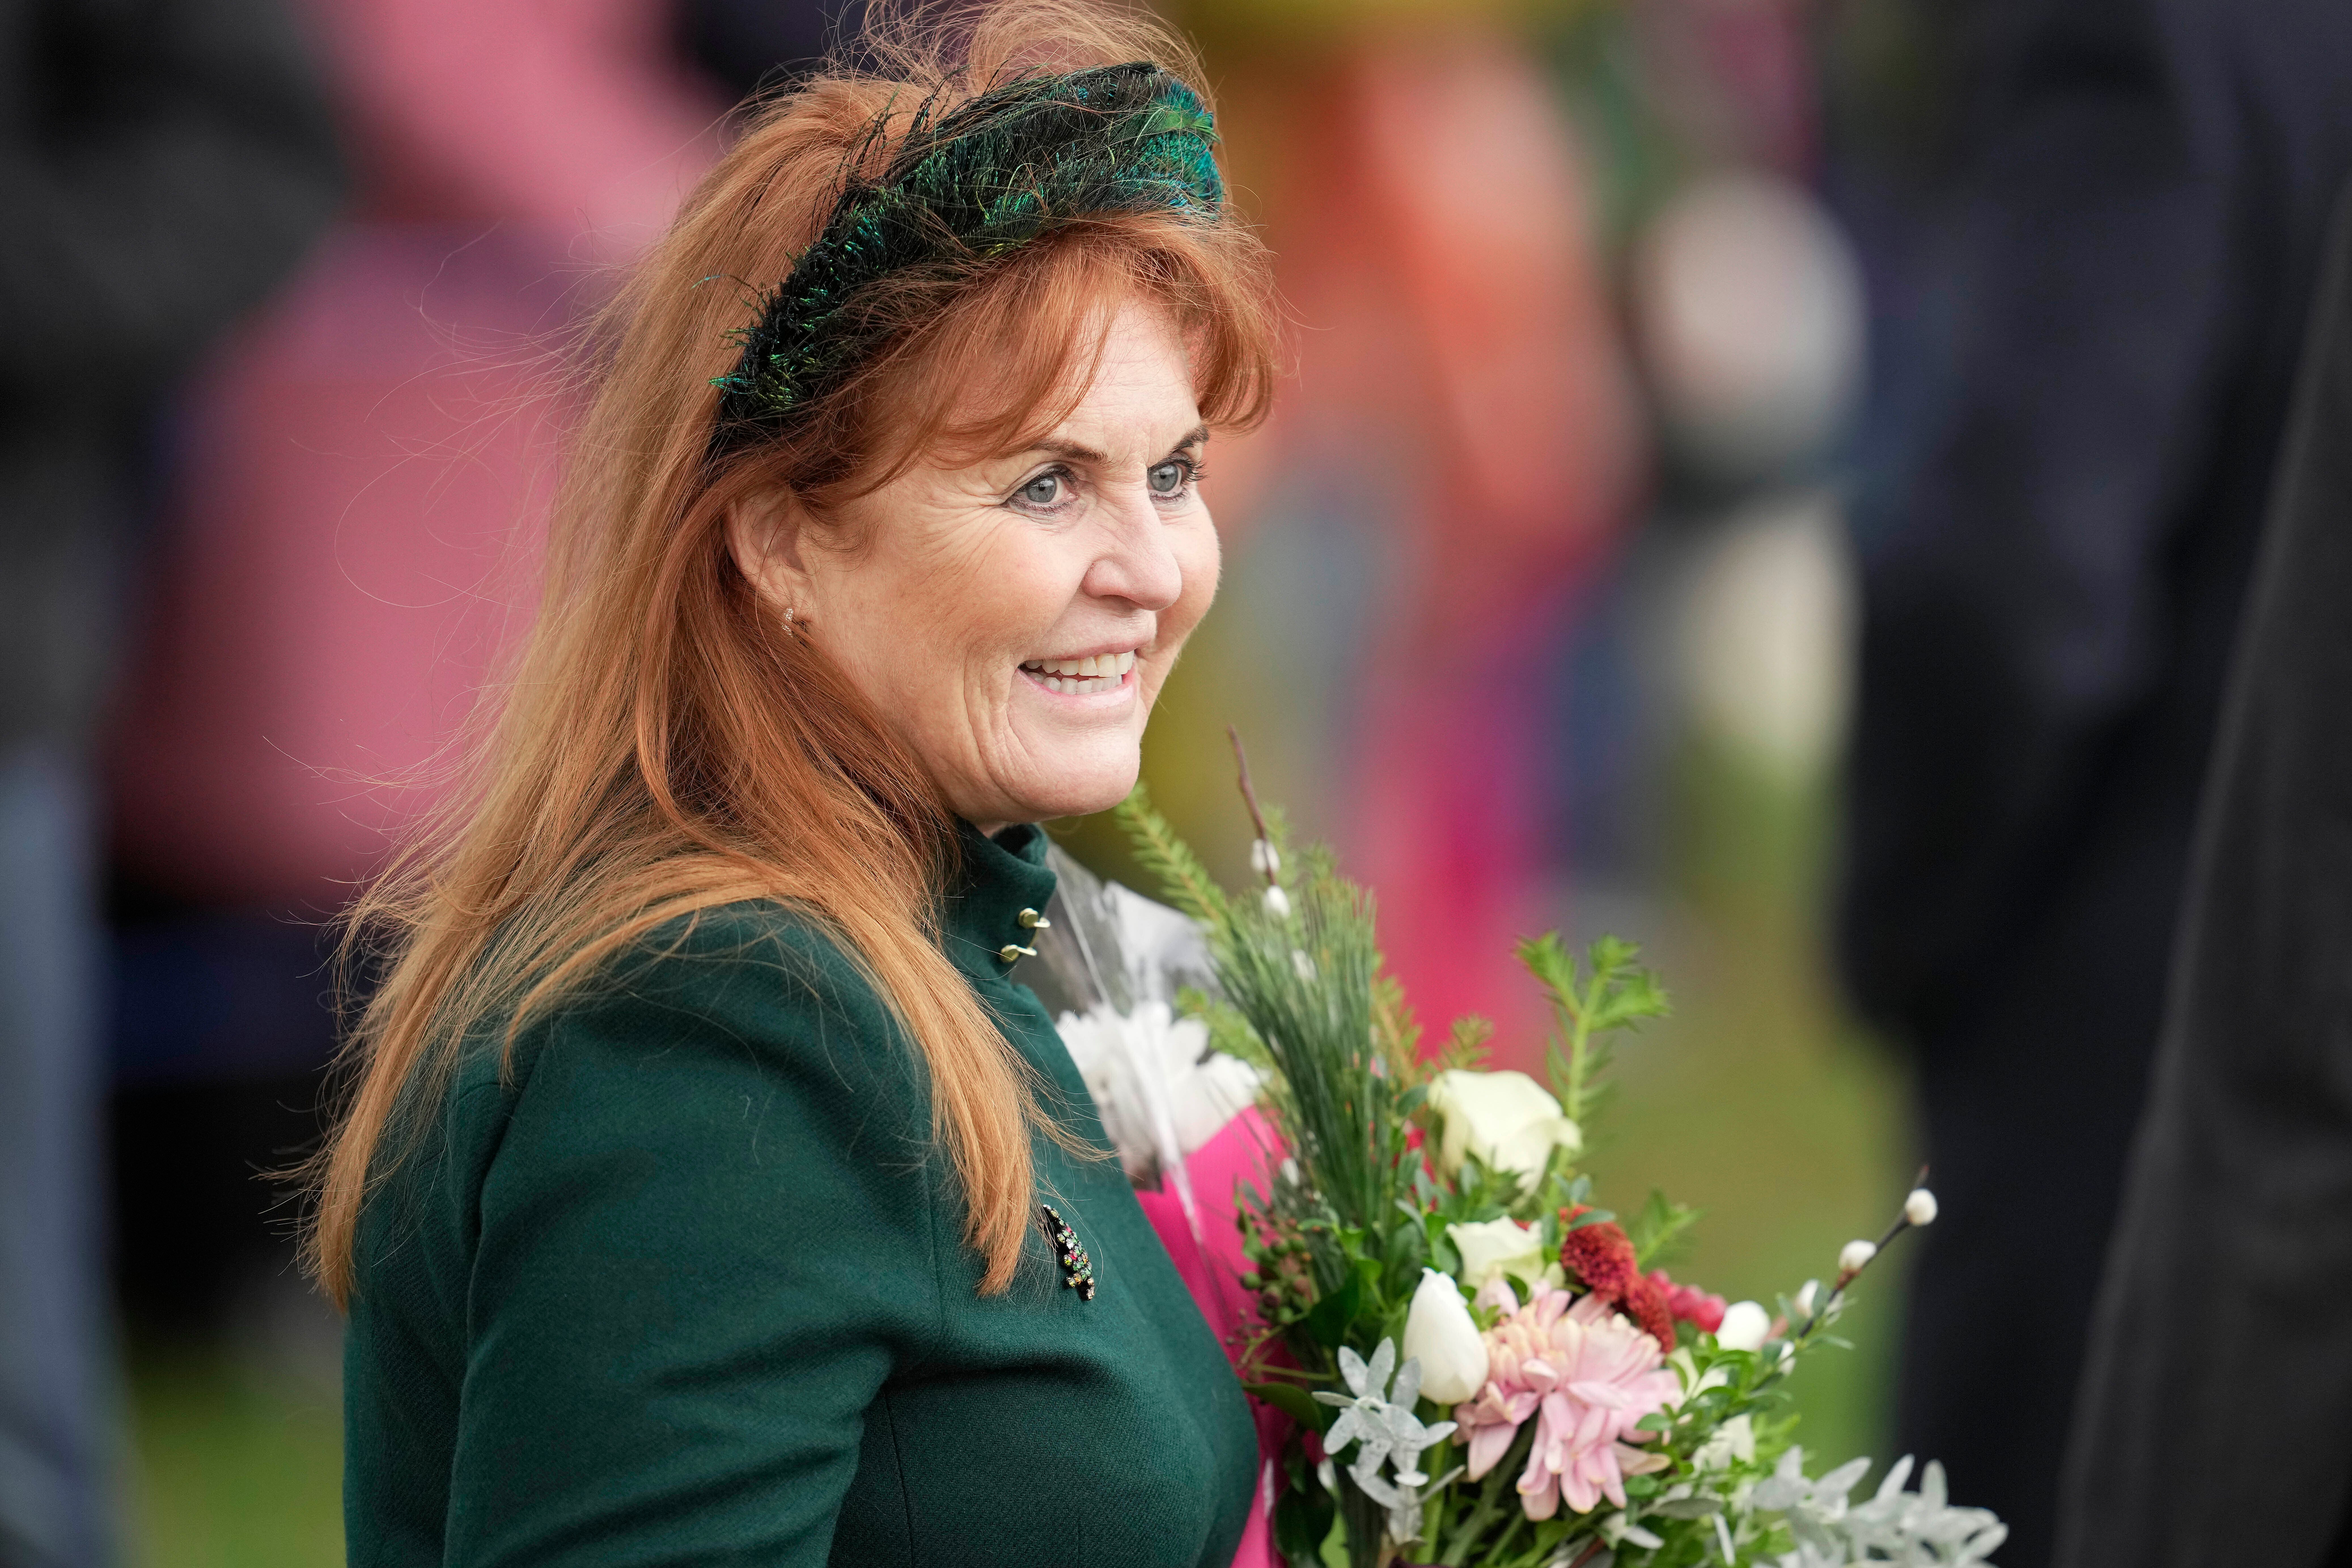 The Duchess of York was pictured smiling as she joined the royal family on Christmas Day